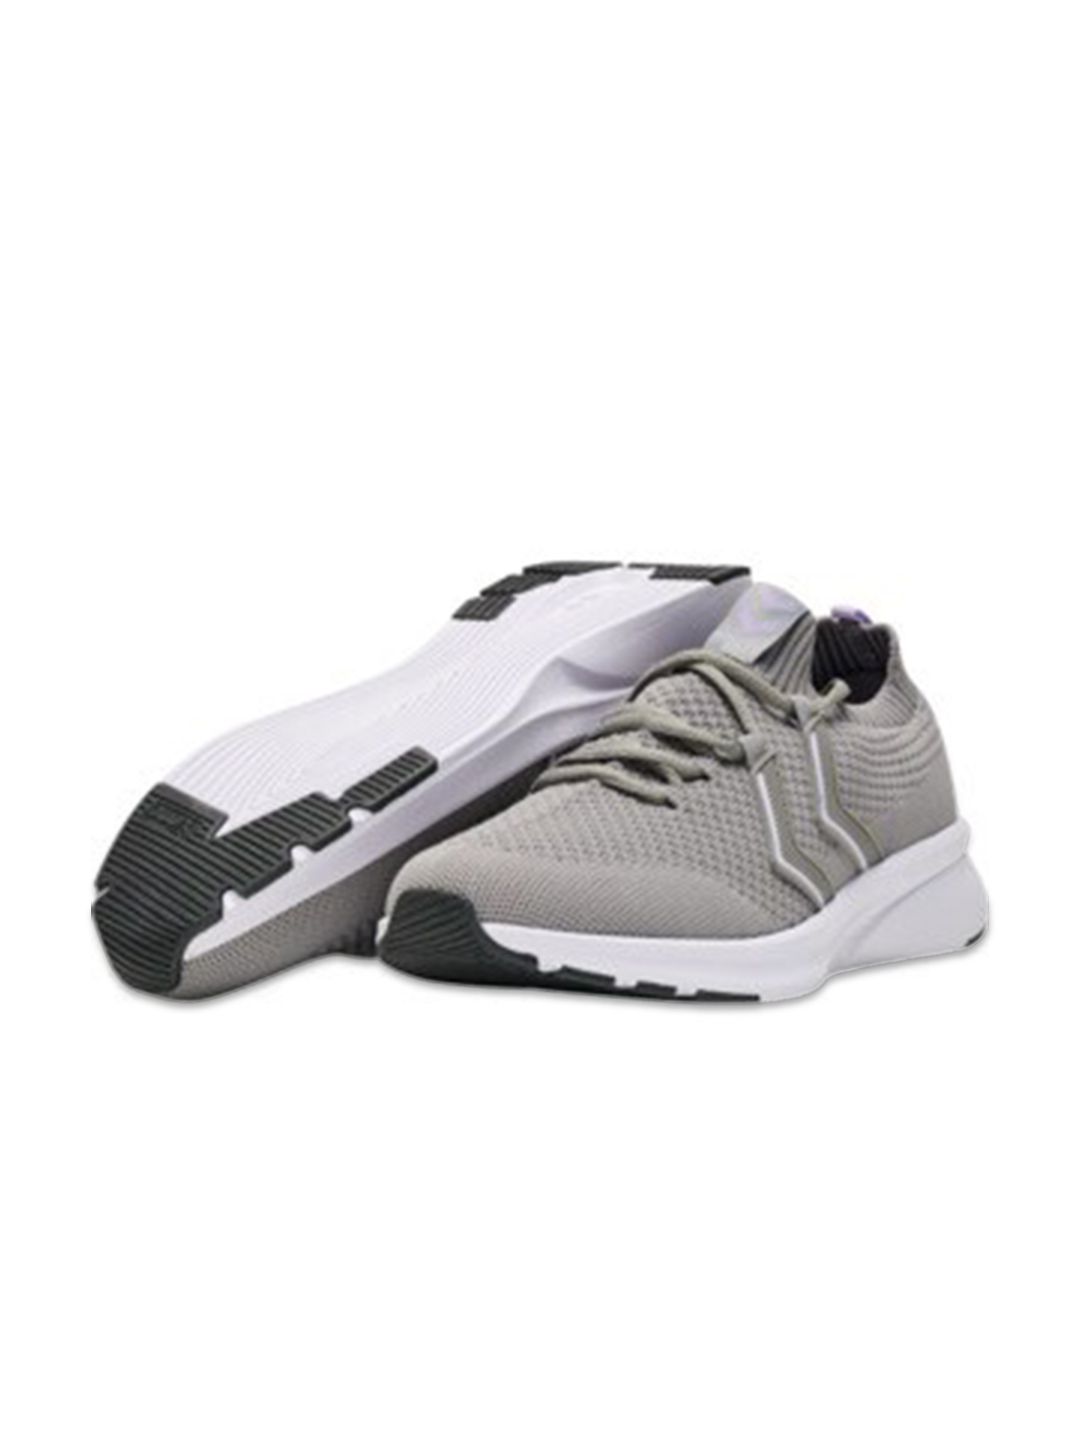 hummel Women Grey Textile Training or Gym Shoes Price in India